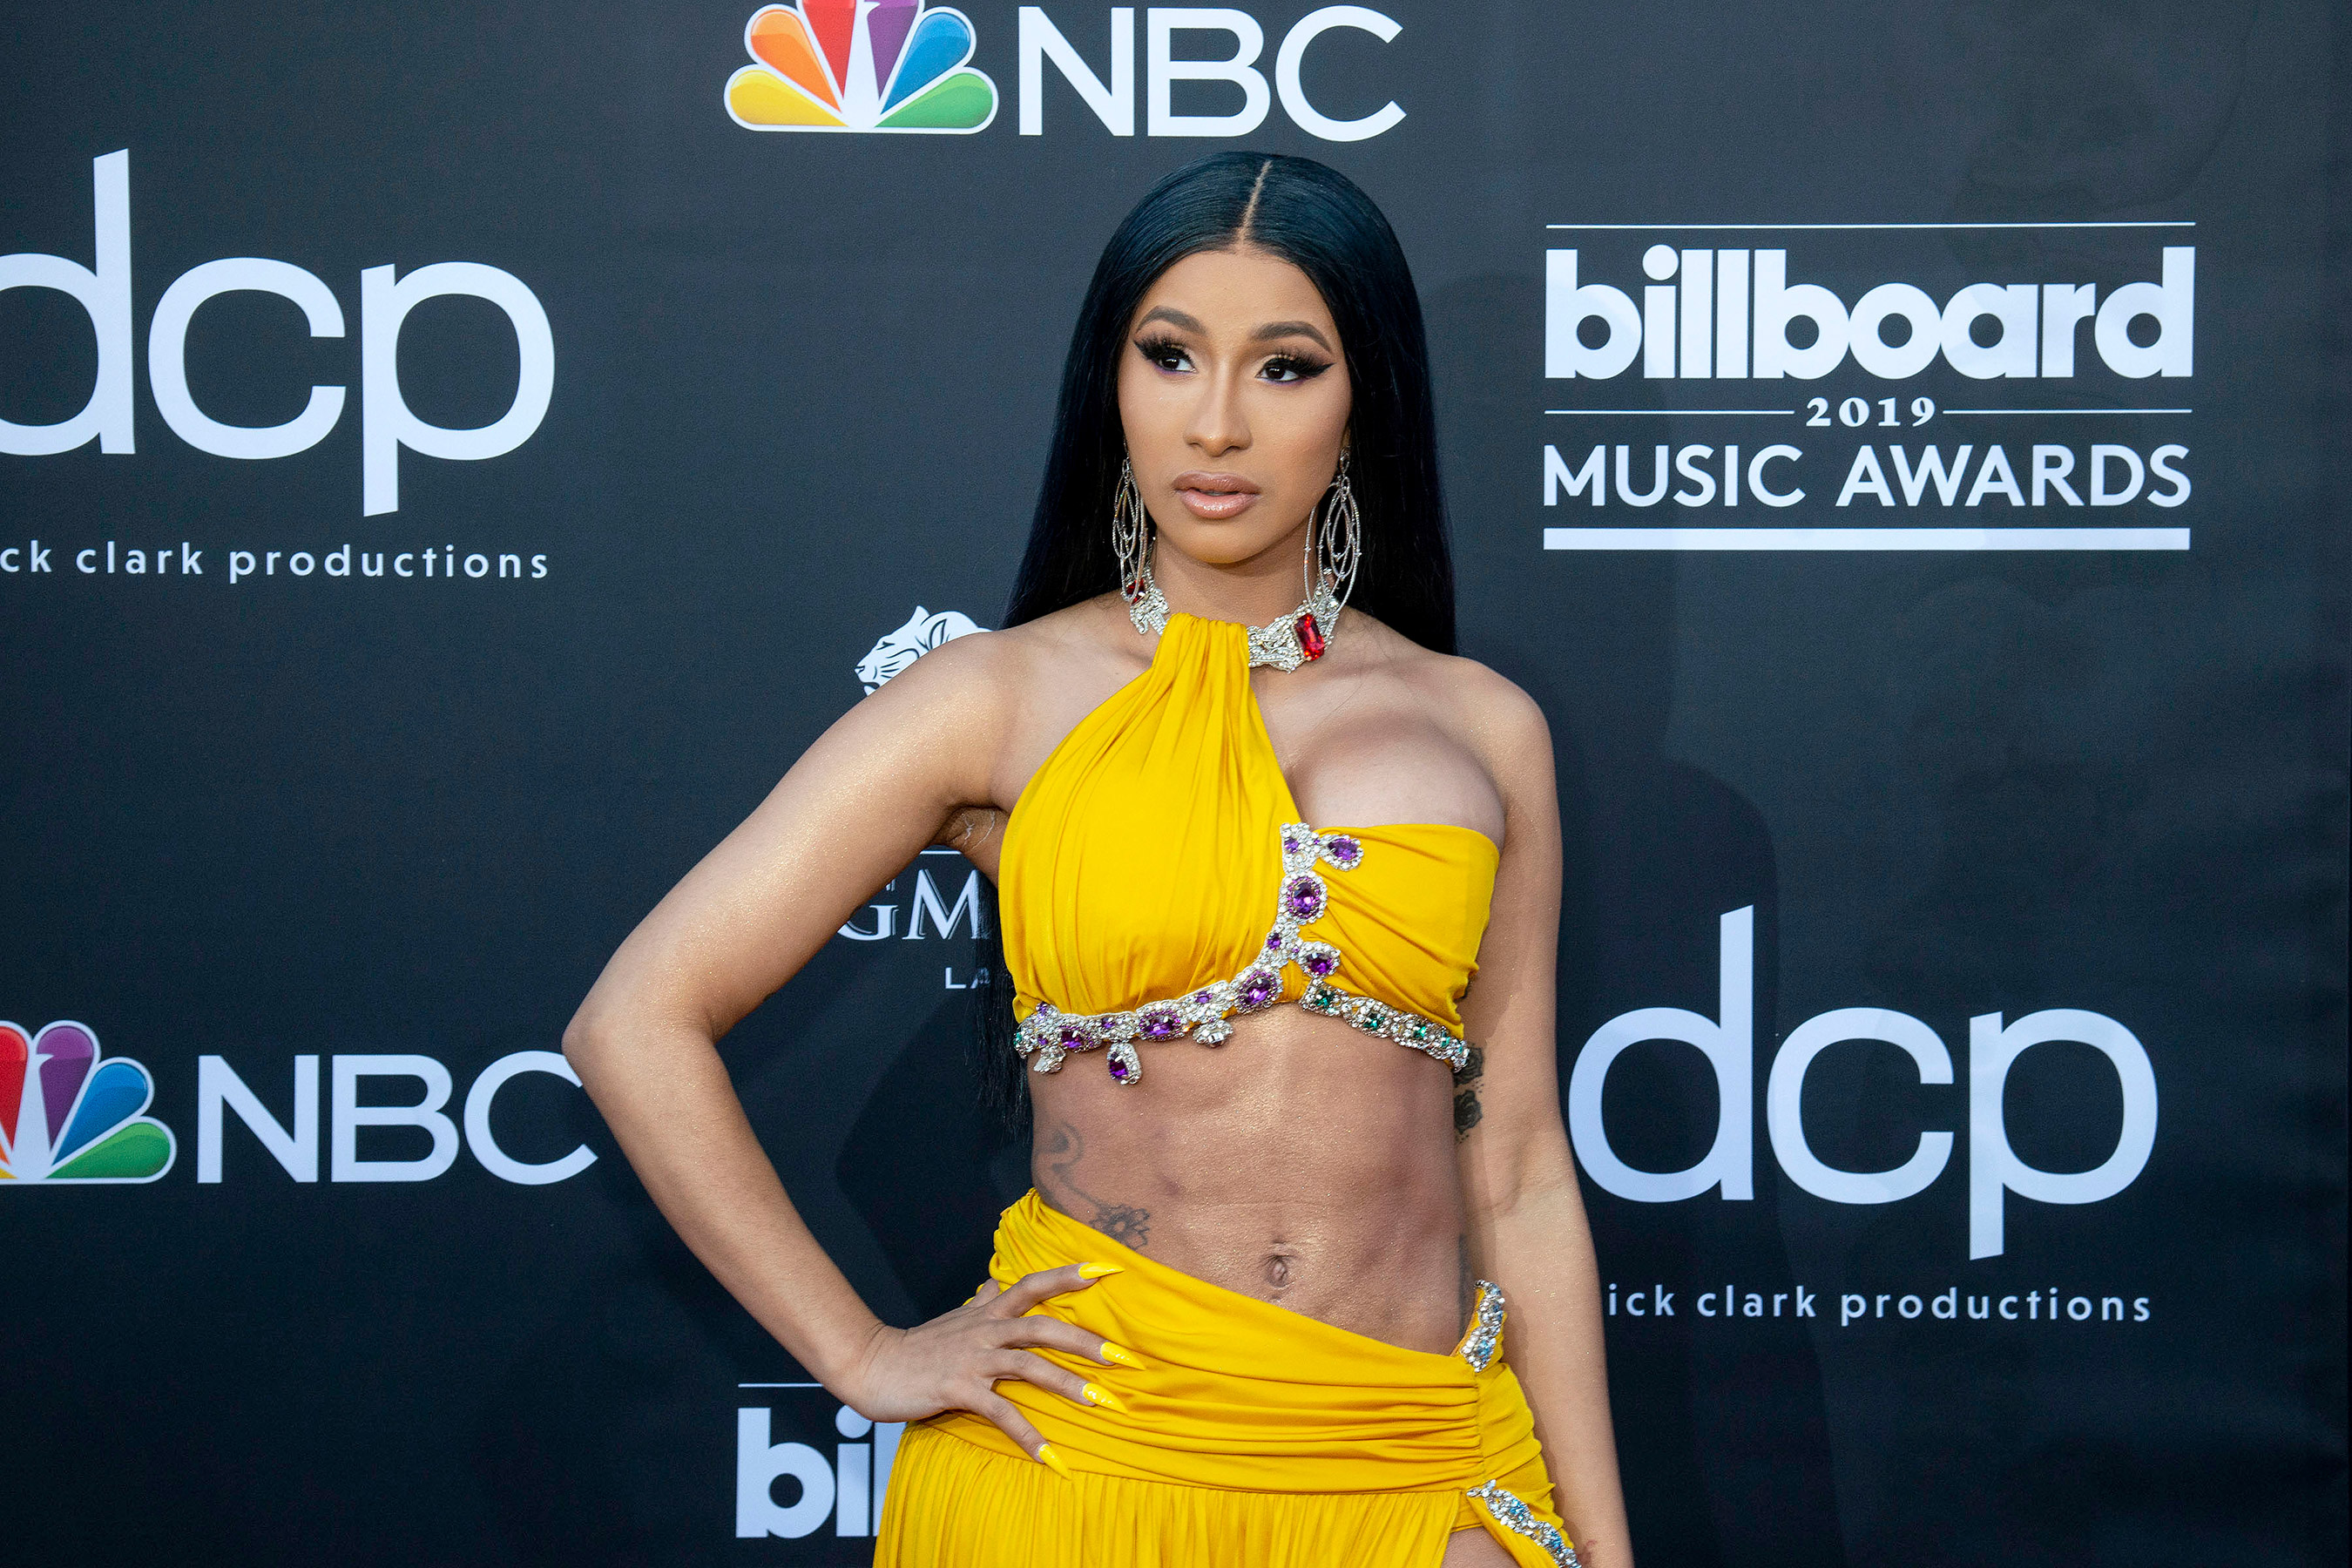 Cardi B Goes Fully Nude in Artwork for New Single 'Press'